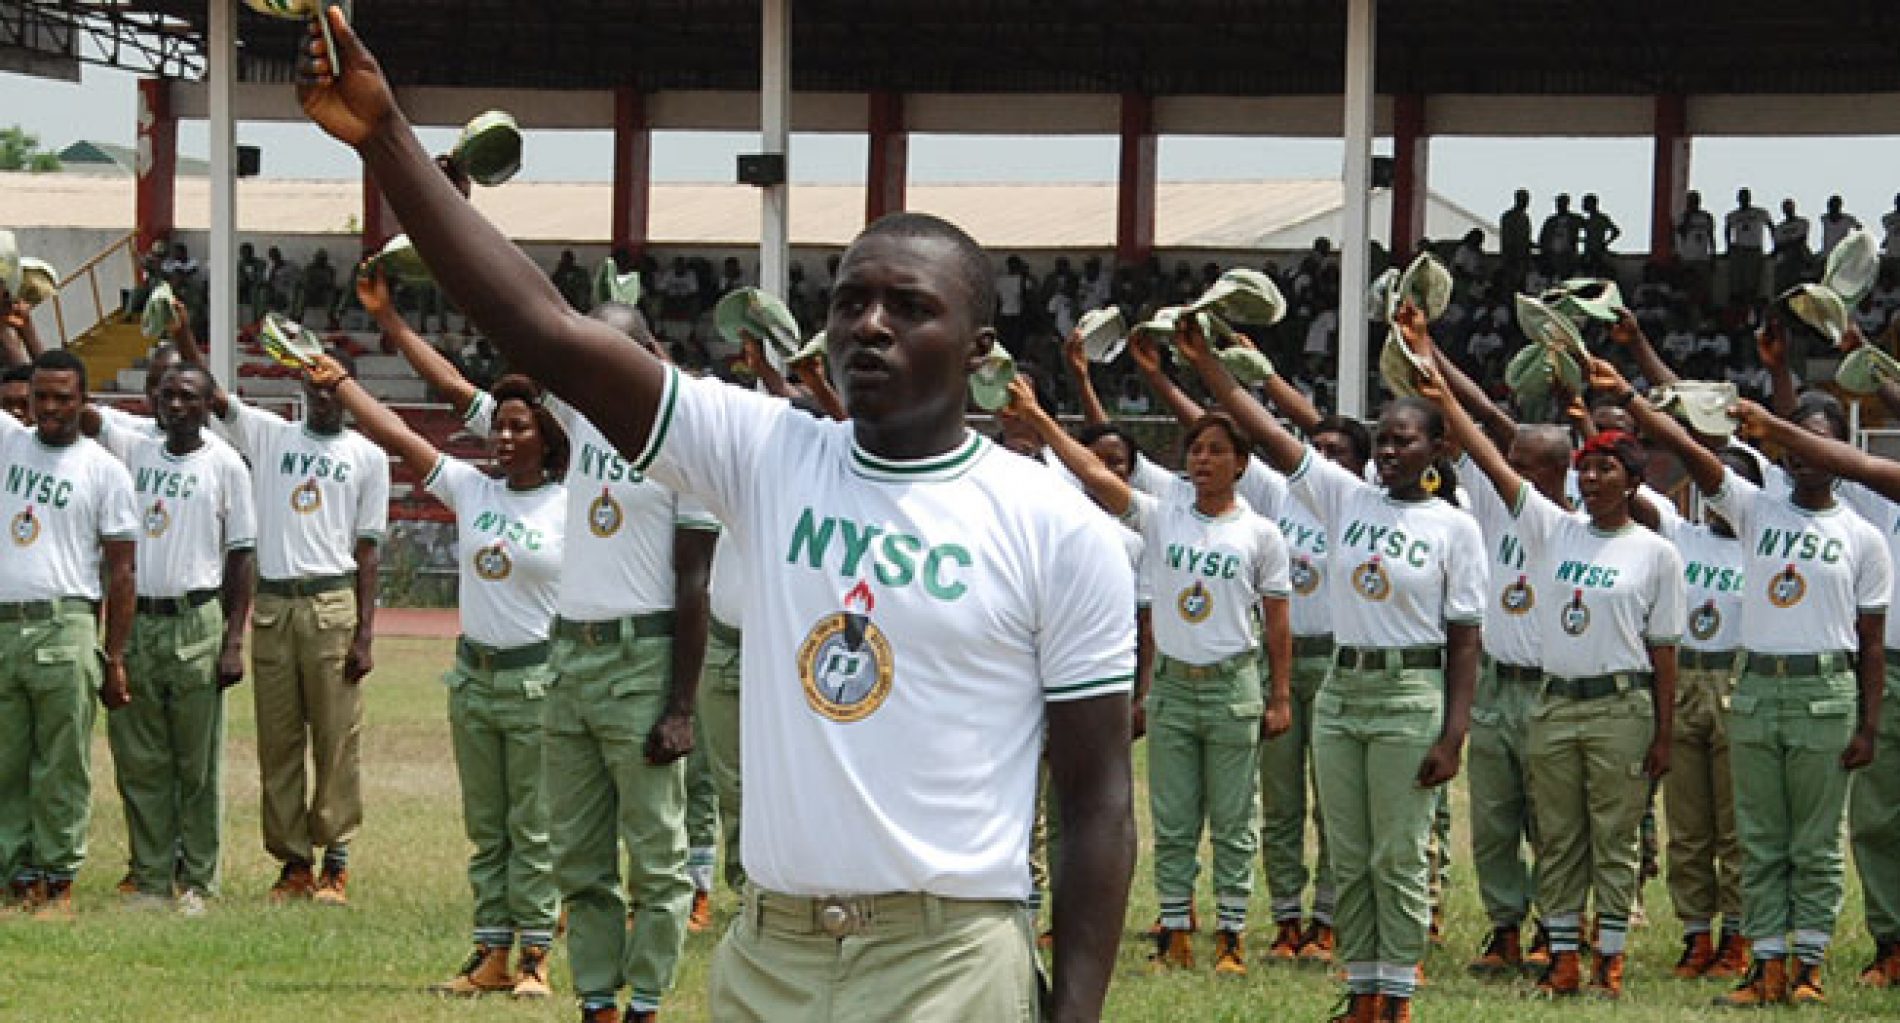 JEWEL IN THE SAVANNAH (An NYSC Experience)